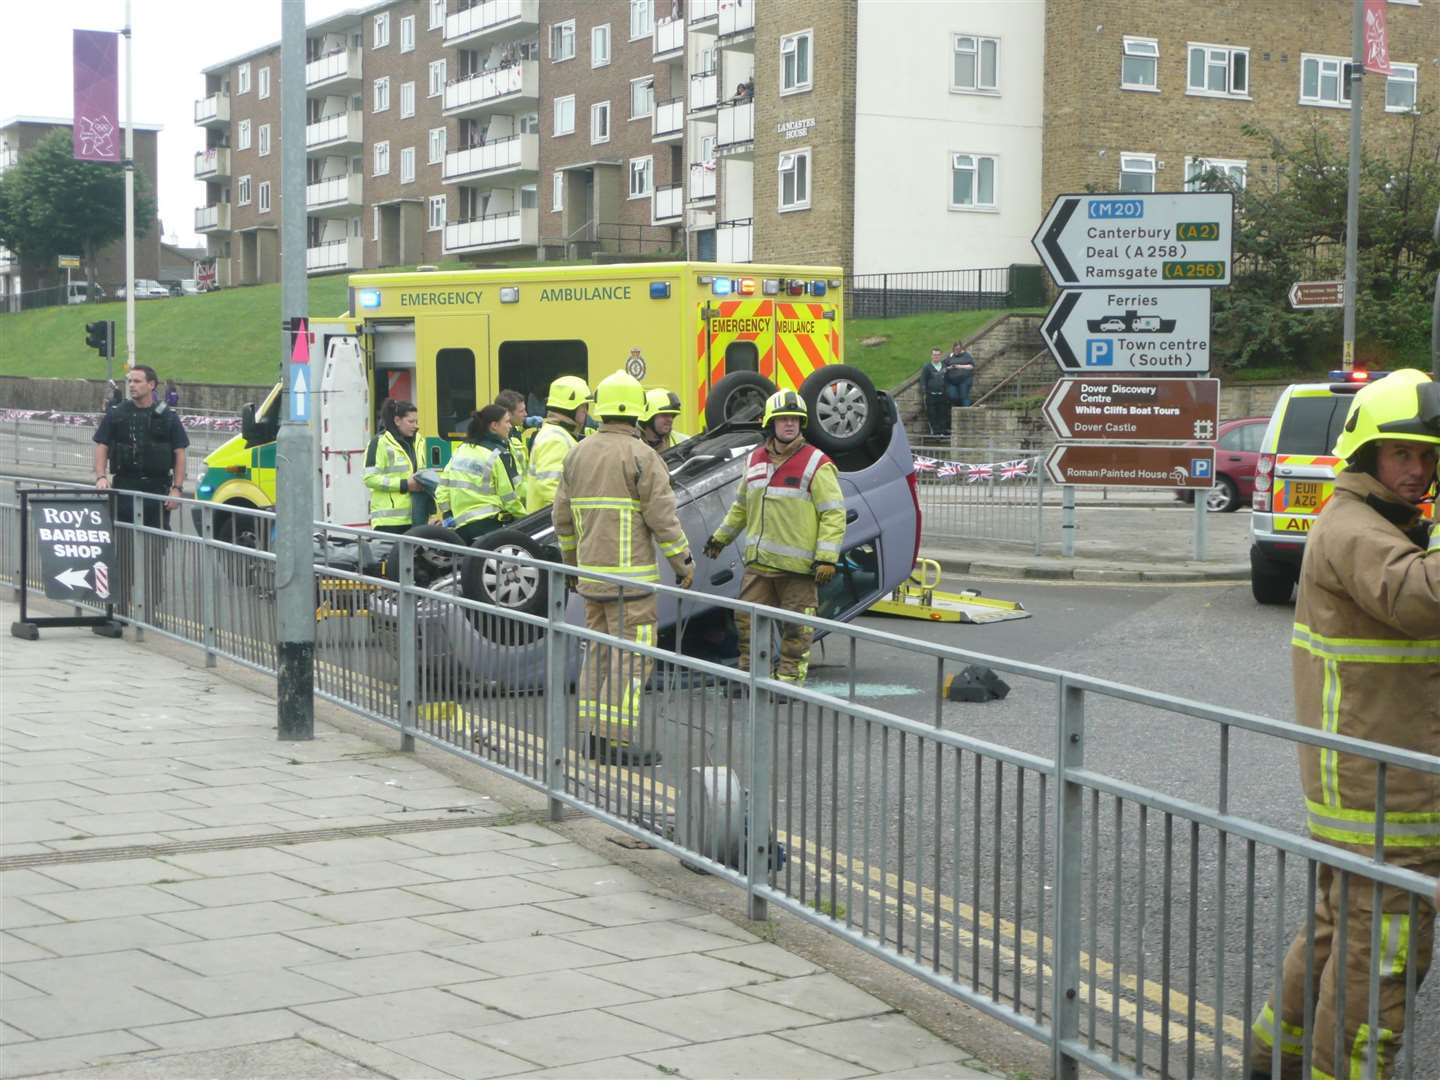 The scene of a crash at York Street, Dover, when a car overturned just a couple of hours before the torchbearer was due. Pic: Graham Tutthill